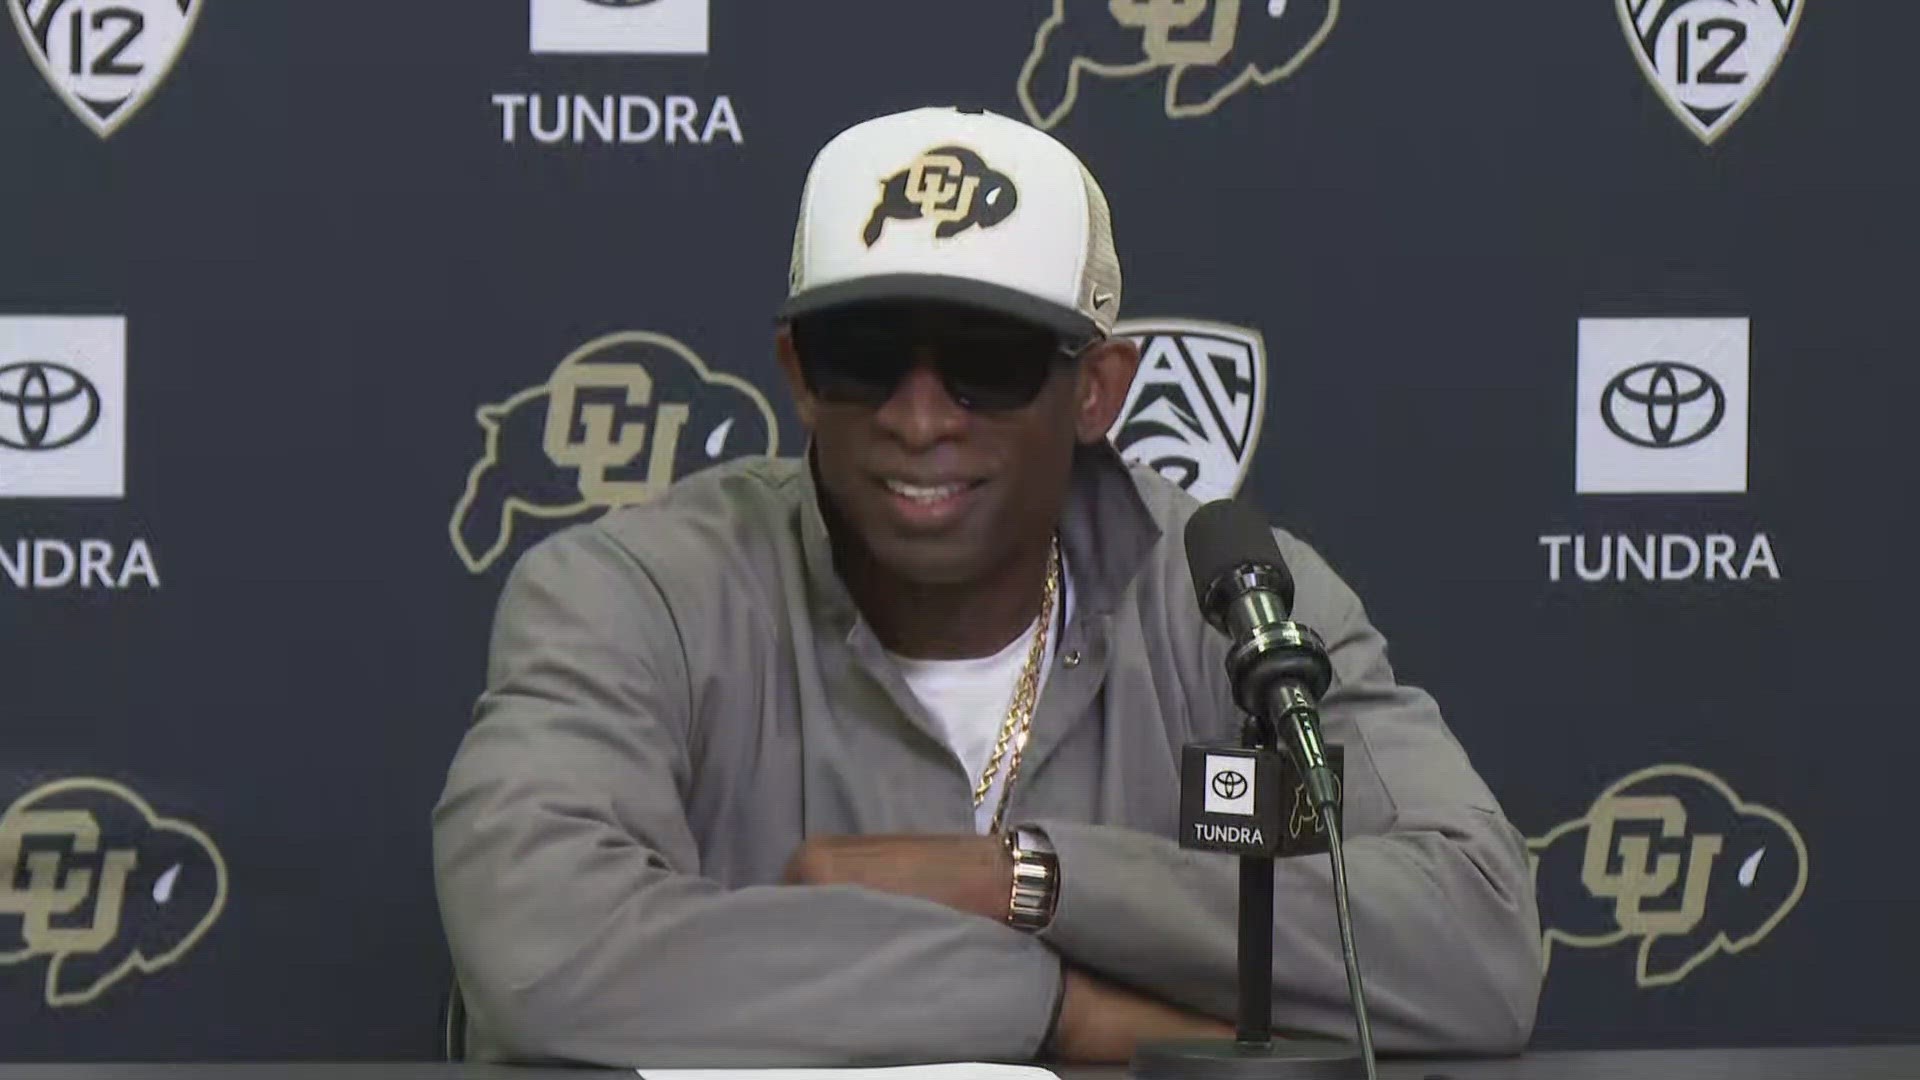 New Buffs head coach Deion "Coach Prime" Sanders held a press conference Tuesday as he prepares his team for a heated Week 3 rivalry game vs. CSU.